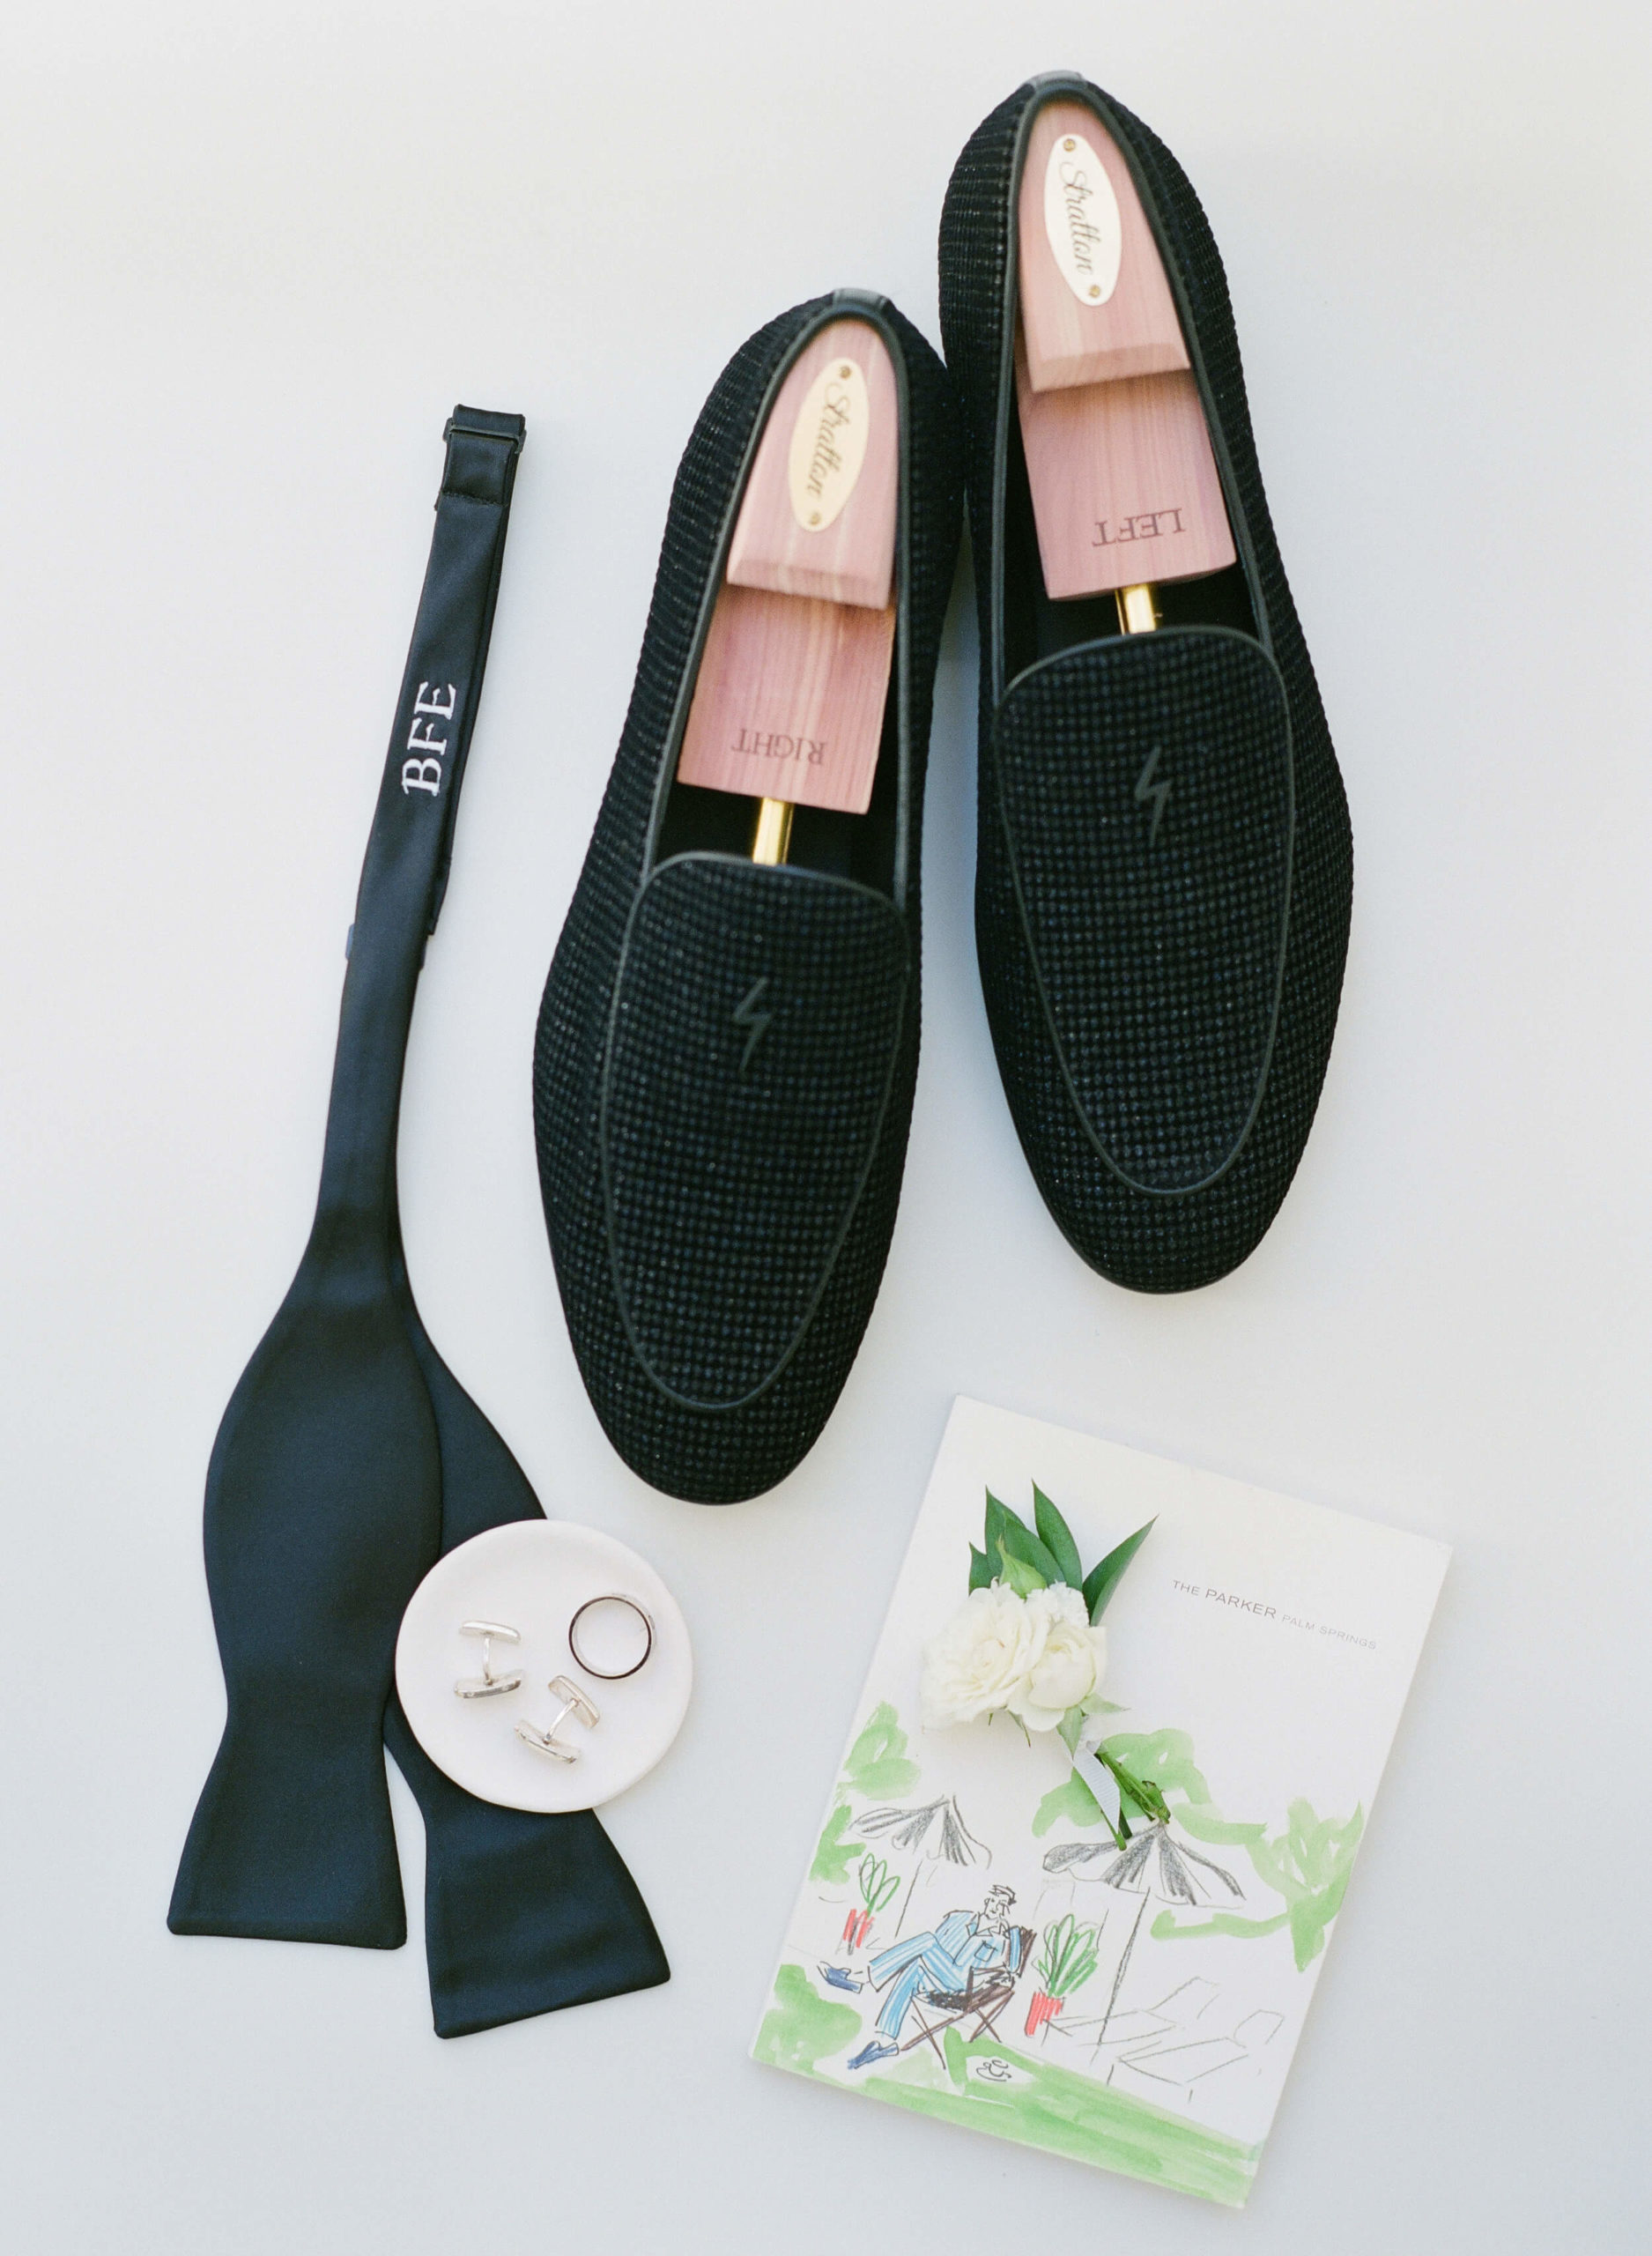 groom's black loafers and accessories